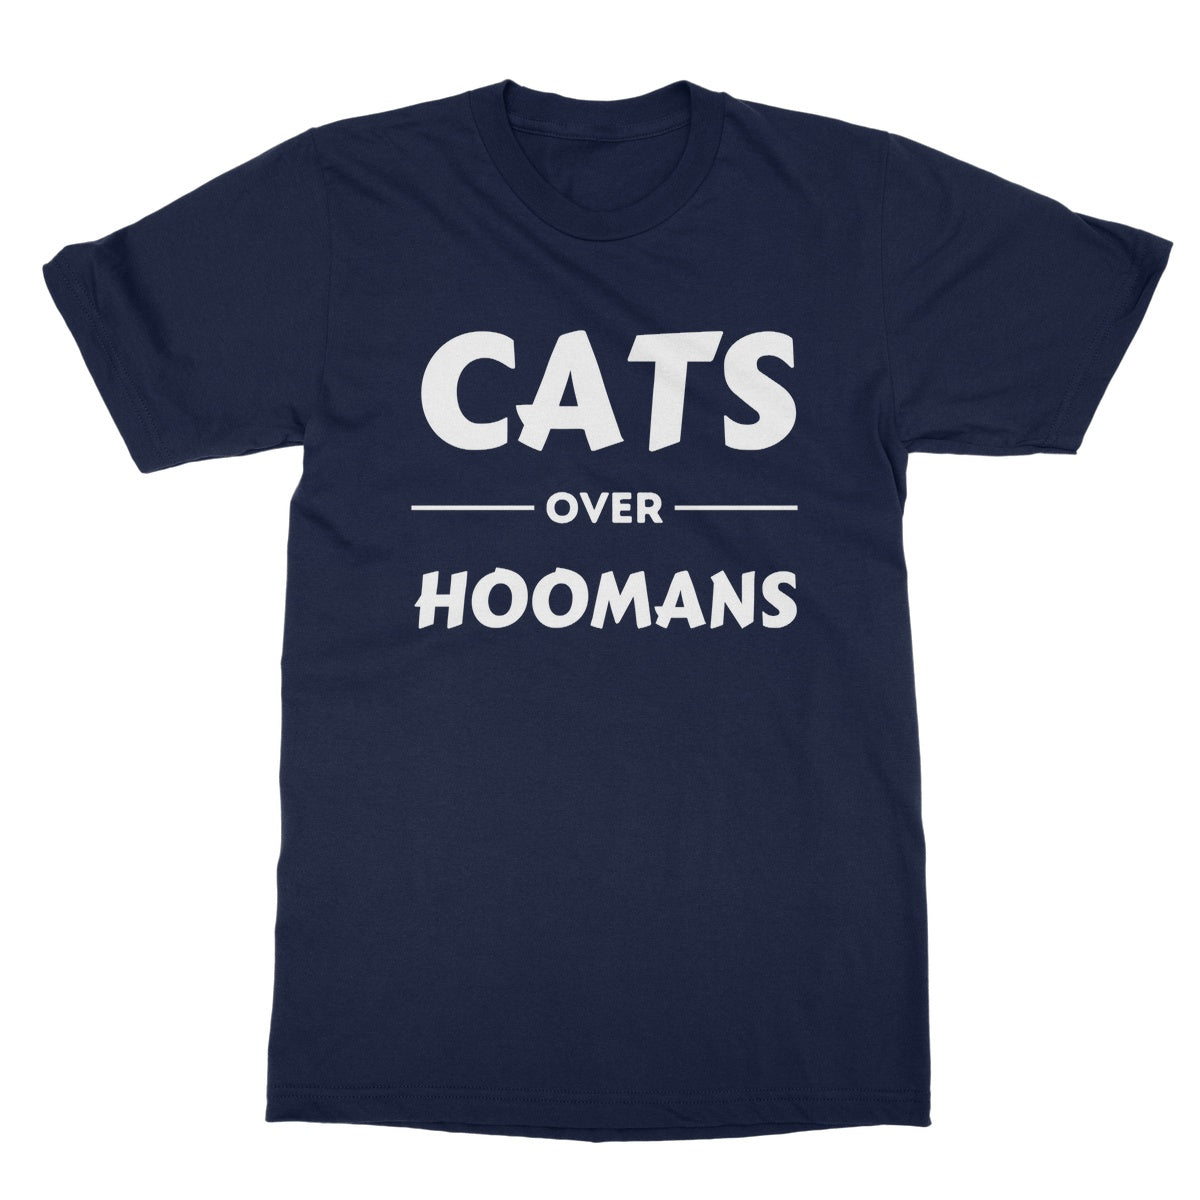 cats over hoomans t shirt navy